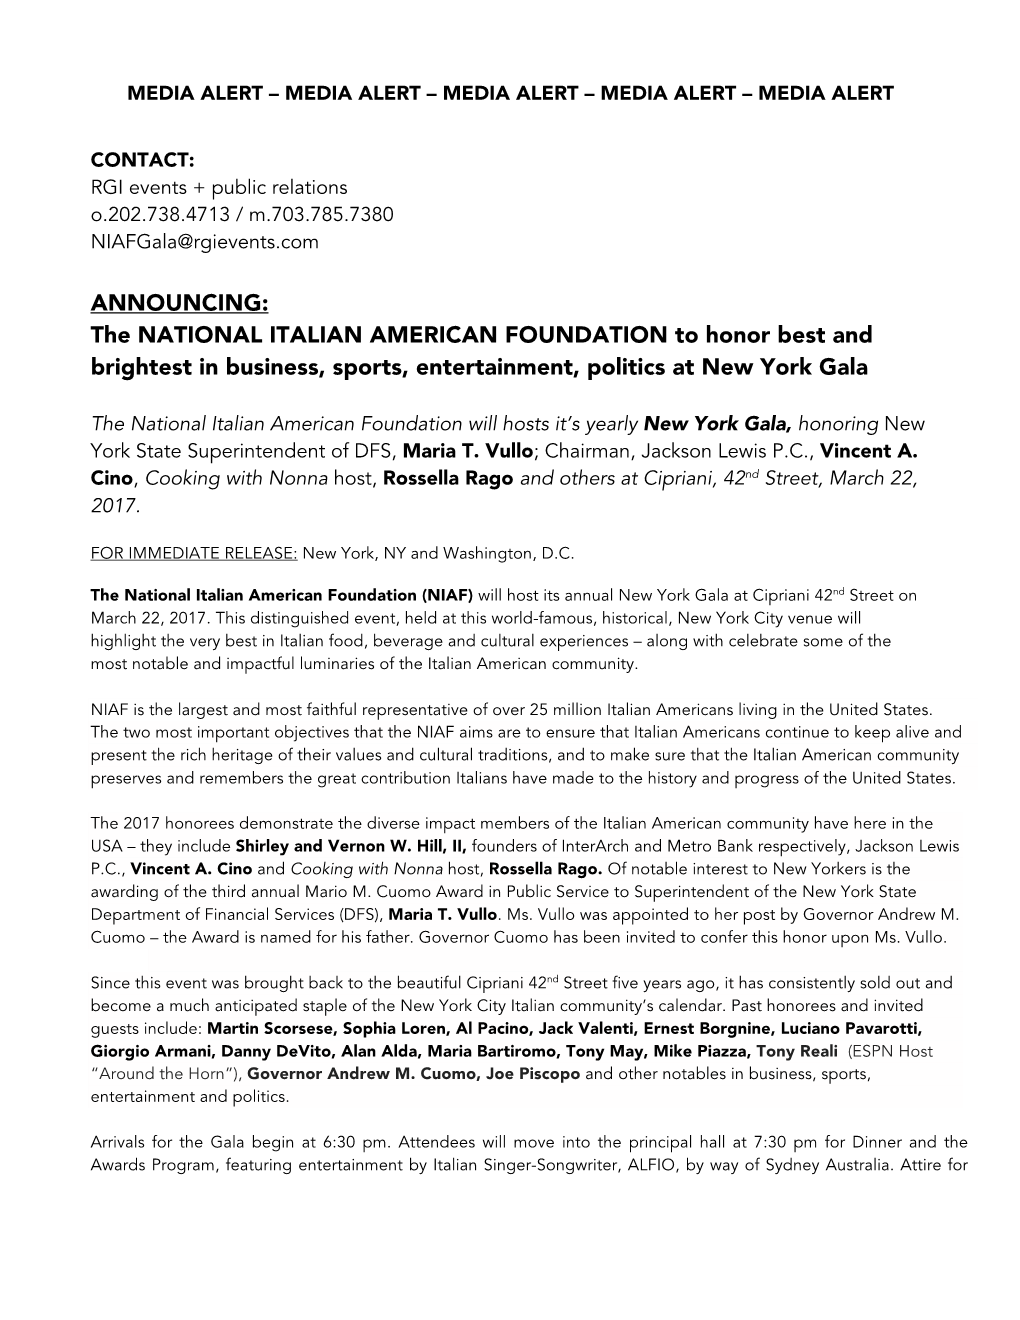 The NATIONAL ITALIAN AMERICAN FOUNDATION to Honor Best and Brightest in Business, Sports, Entertainment, Politics at New York Gala